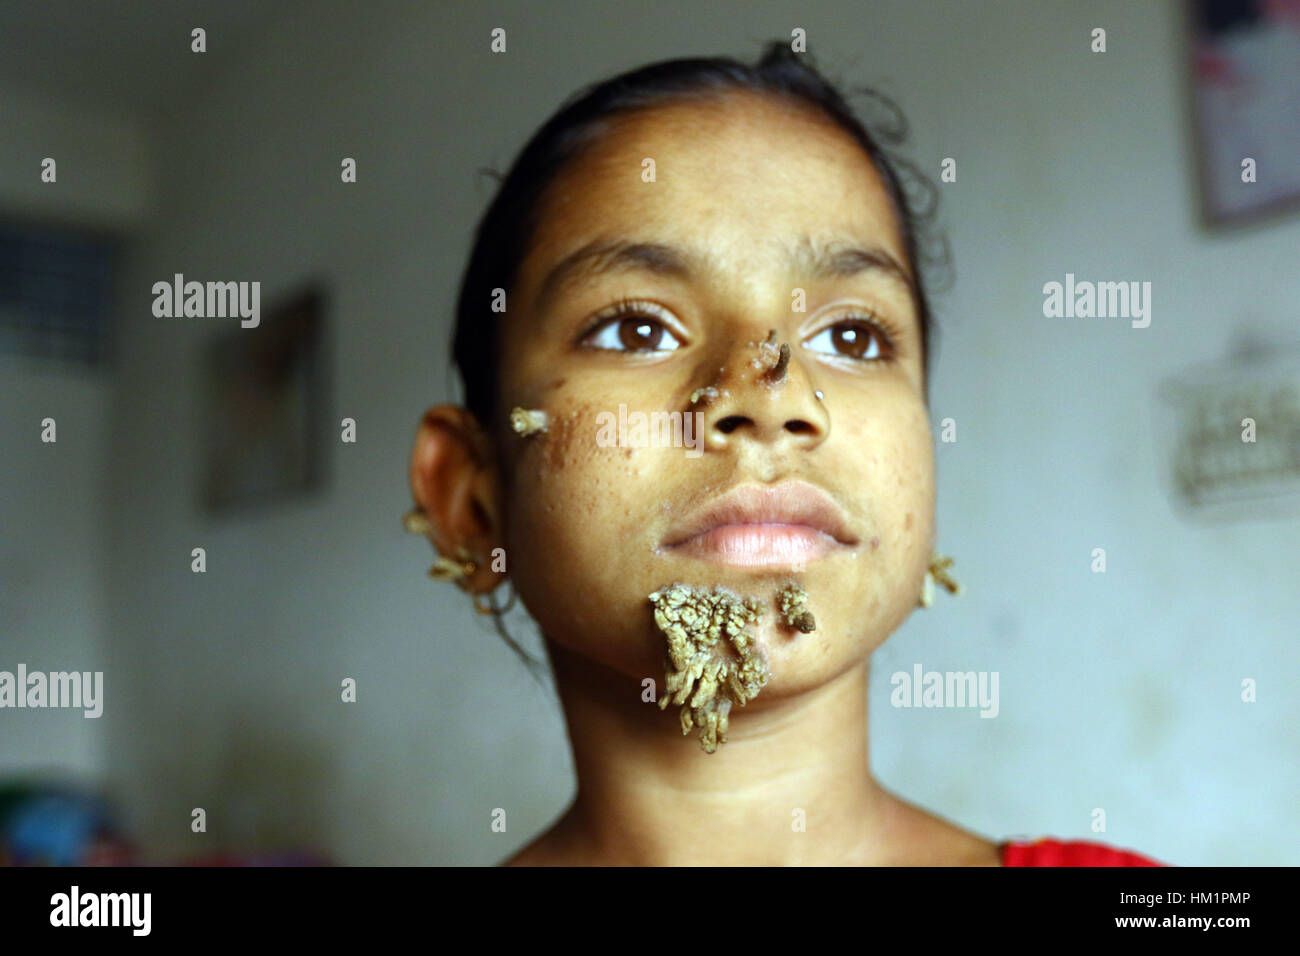 Dhaka, Bangladesh. 01 Feb, 2017. Bangladeshi patient Sahana Khatun, 10, poses for a photograph at the Dhaka Medical College and Hospital. A young Bangladeshi girl with bark-like warts growing on her face could be the first female ever afflicted by so-called 'tree man syndrome', doctors studying the rare condition said January 31. Ten-year-old Sahana Khatun has the tell-tale gnarled growths sprouting from her chin, ear and nose, but doctors at Dhaka's Medical College Hospital are still conducting tests to establish if she has the unusual skin disorder. Stock Photo